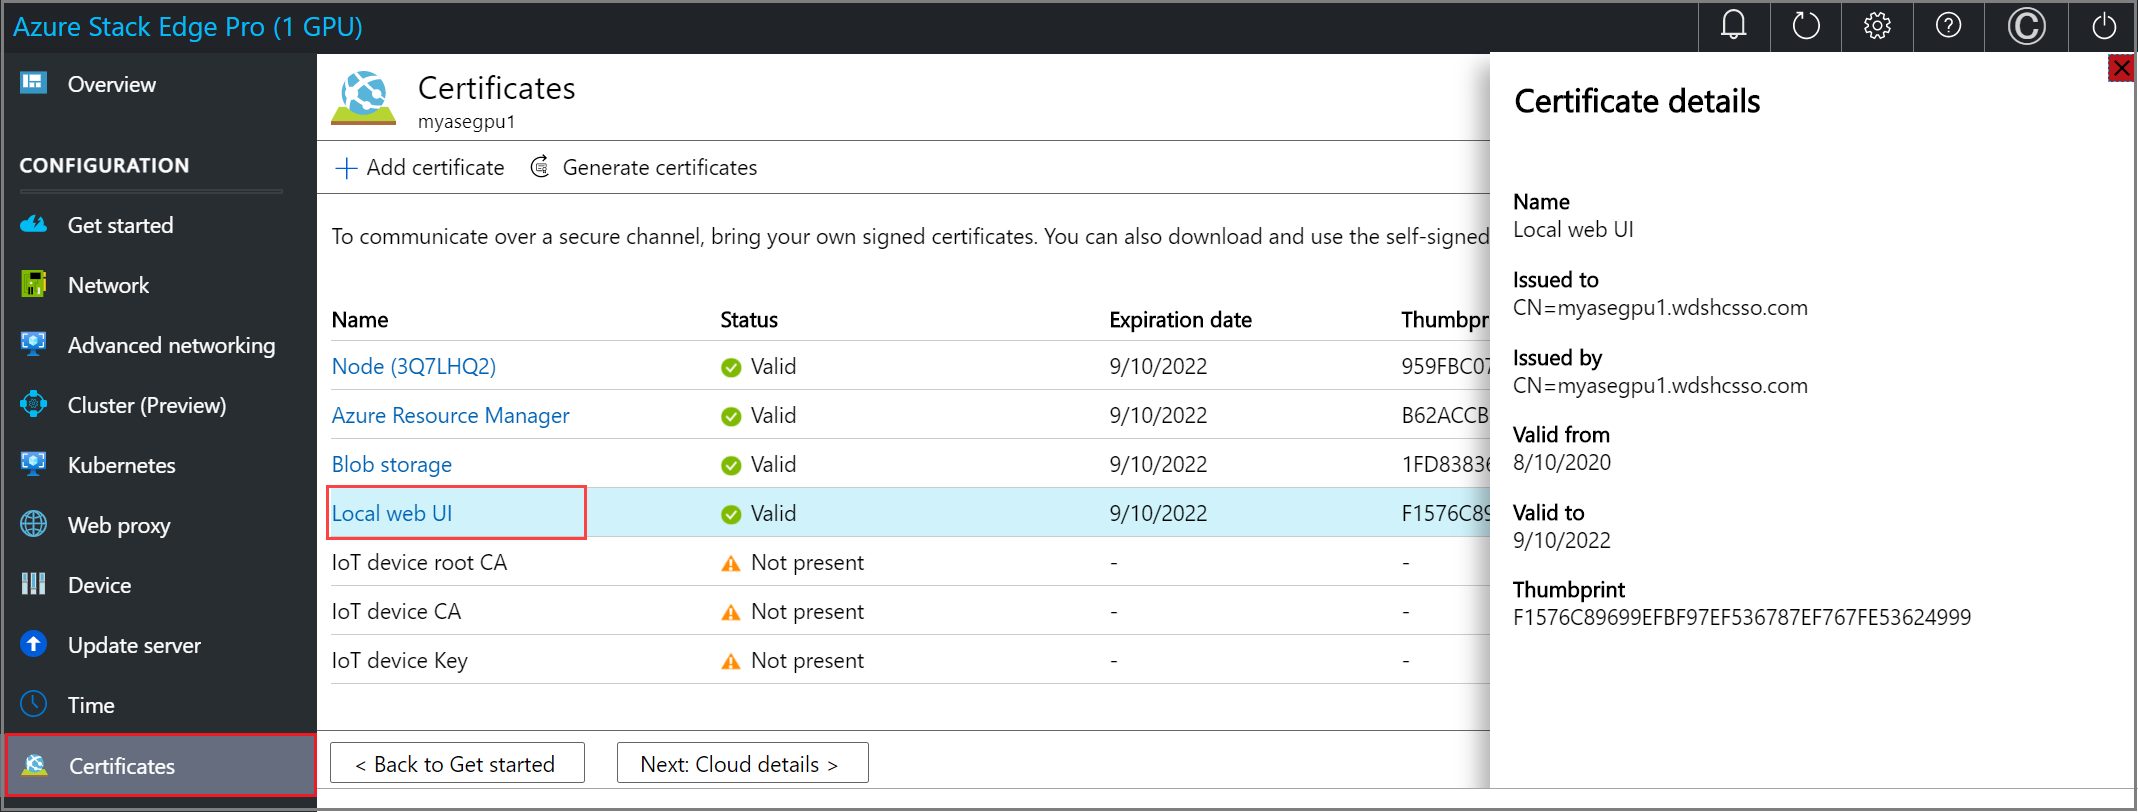 Screenshot showing the Certificate Details pane on the Certificates page of an Azure Stack Edge device. The selected certificate is highlighted.